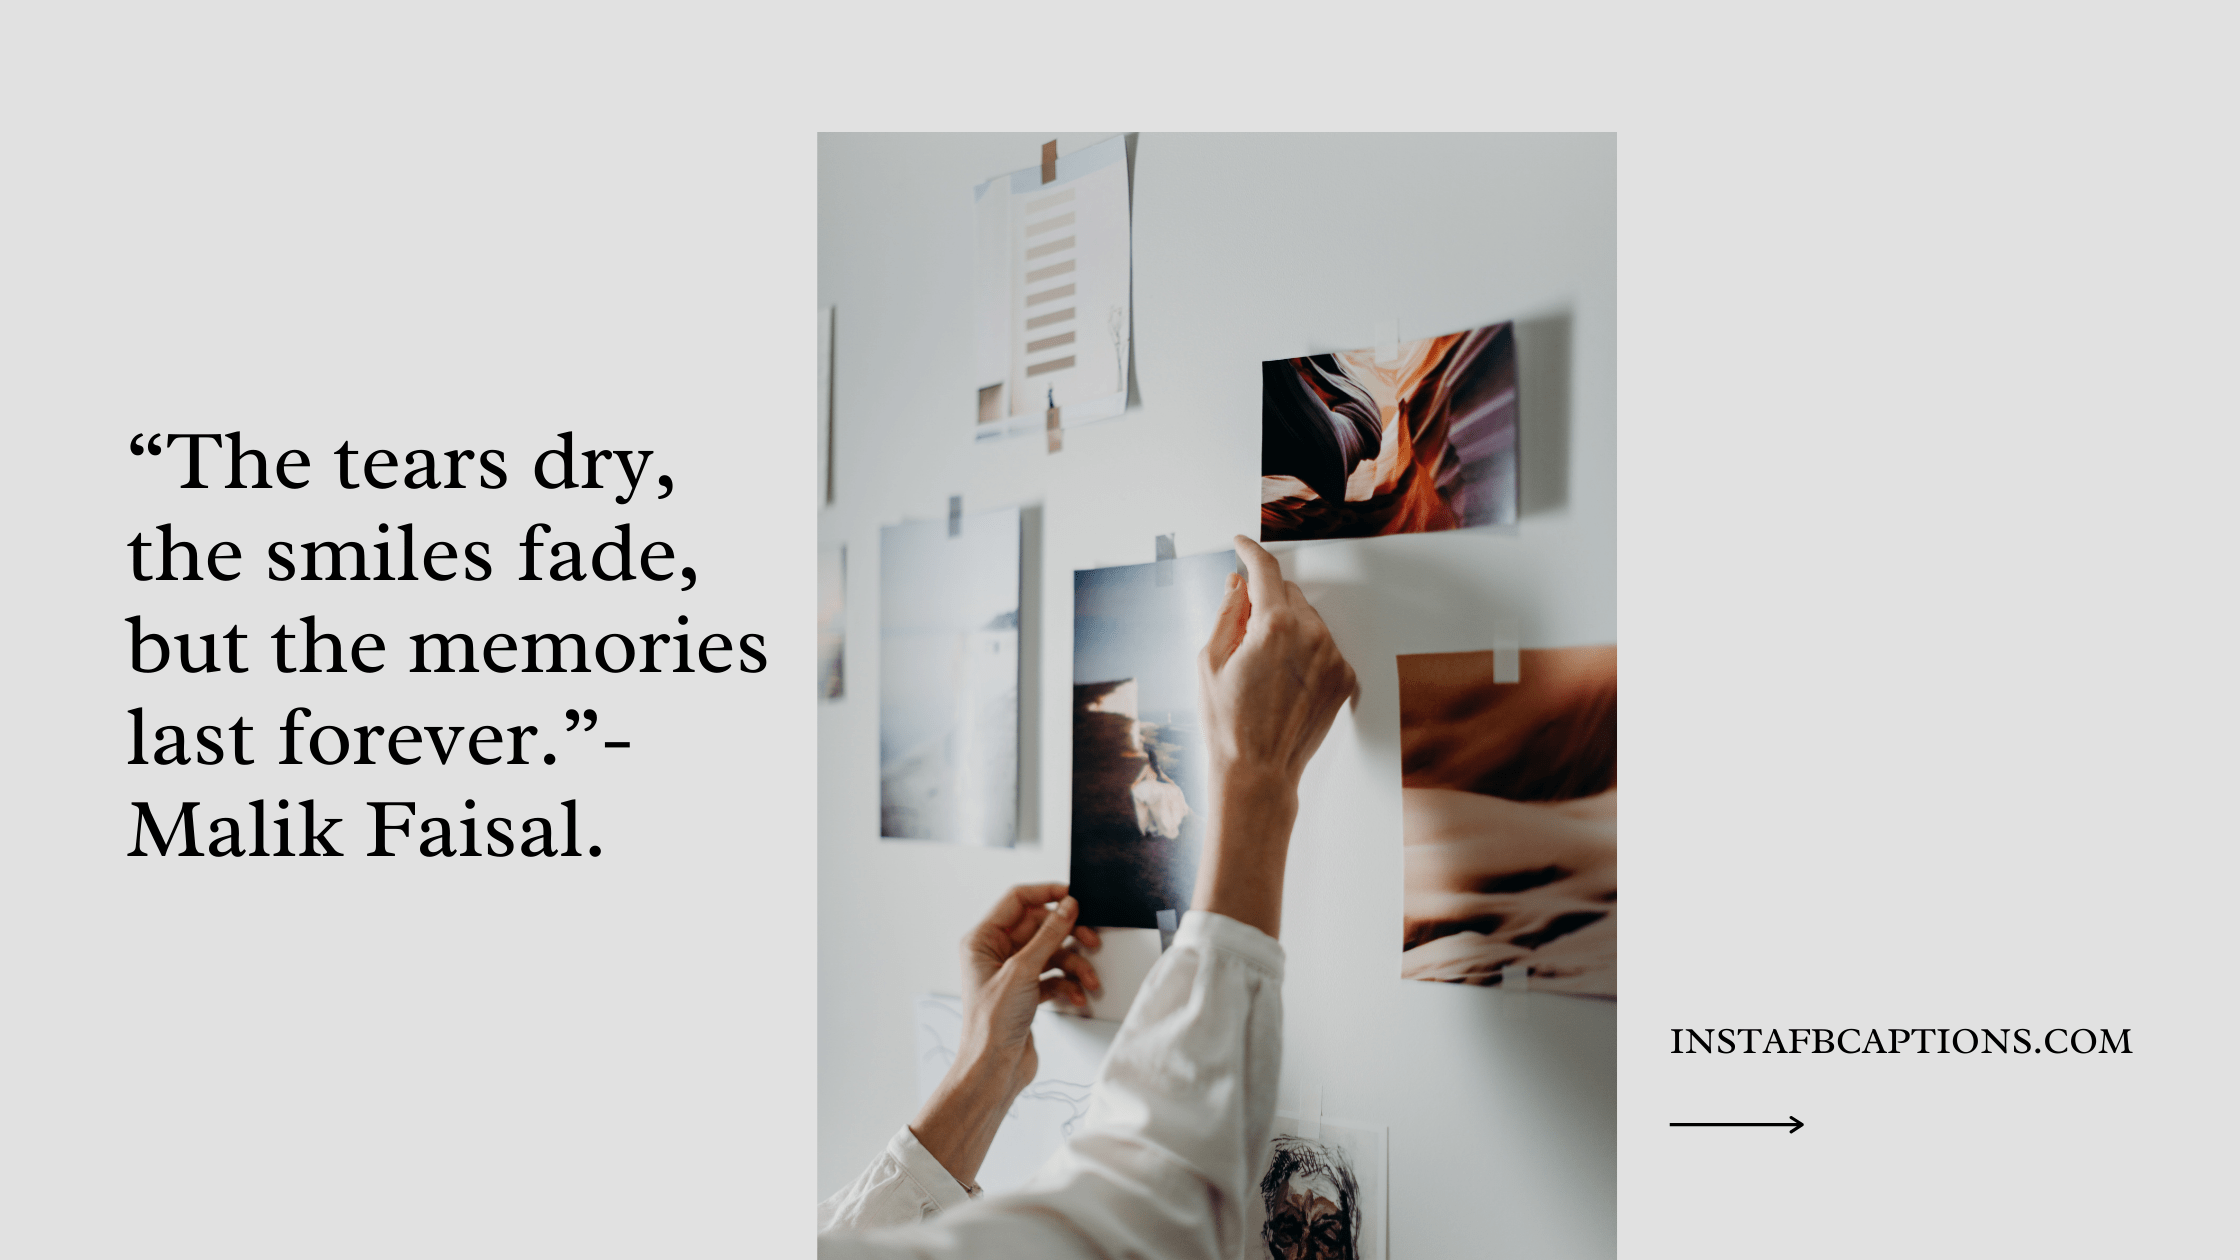 A caption is written - "The tears dry, the smiles fade, but the memories last forever."  - Memories Quotes  - Capture the Moment &#8211; Memories Captions for Instagram In 2023